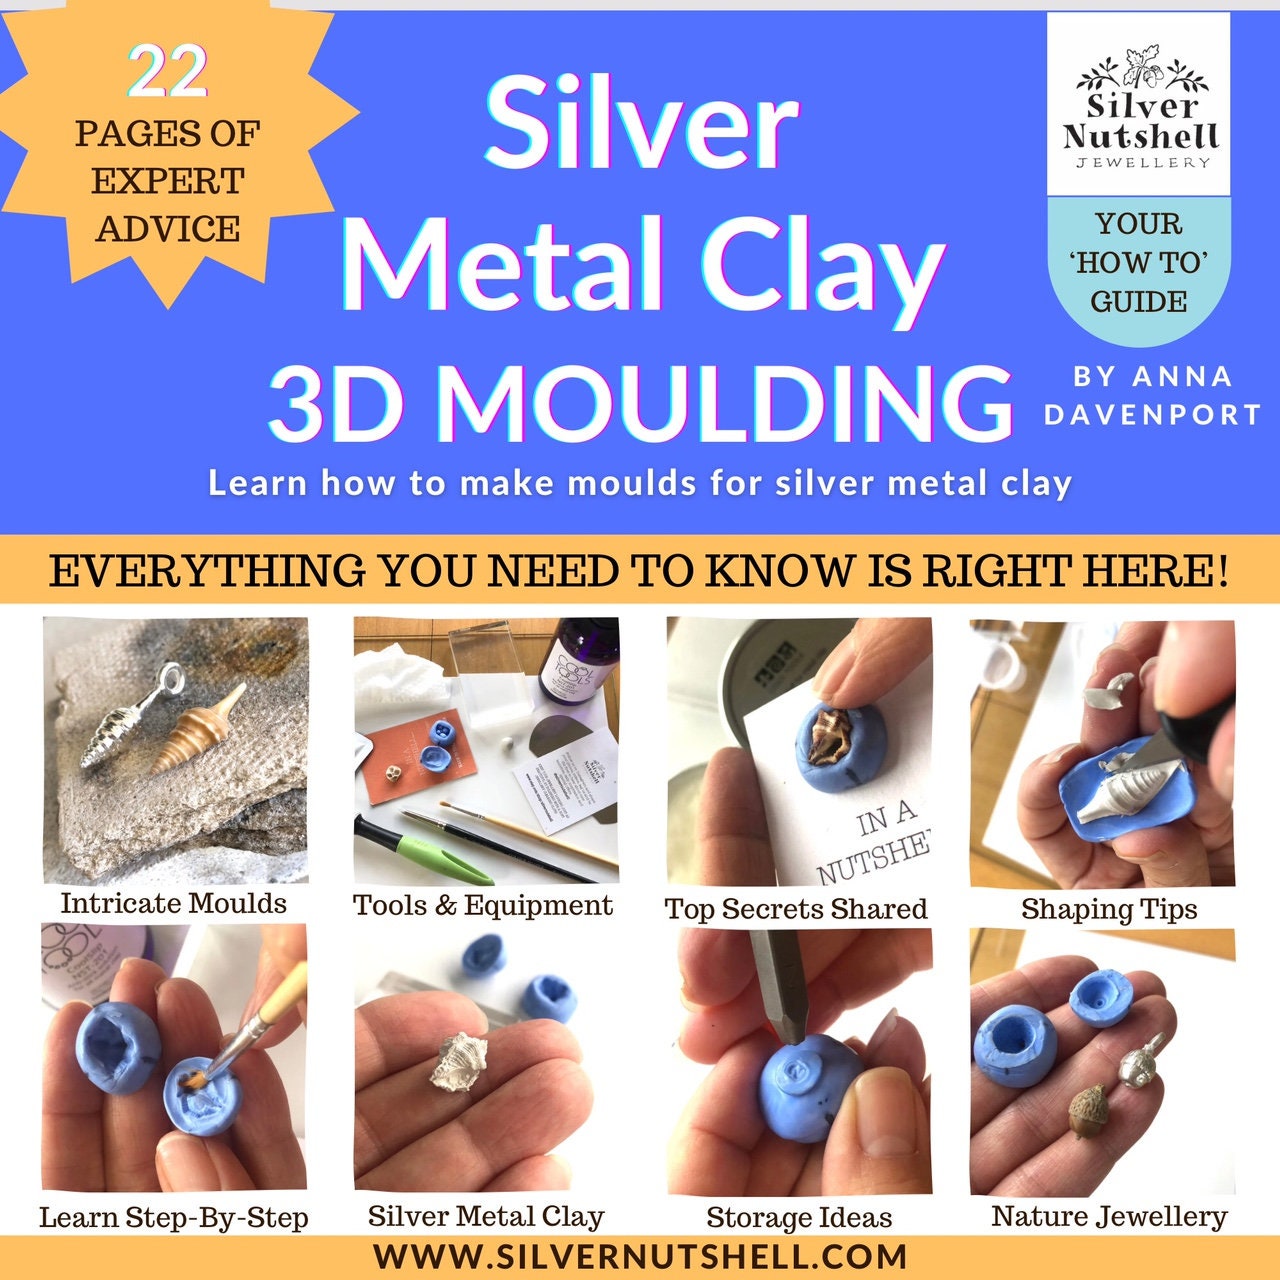 PMC Precious Metal Clay Tools Silver & Polymer Clay Large Ceramic Kiln Kit, with Metal Wire Mesh, for Jewelry Making